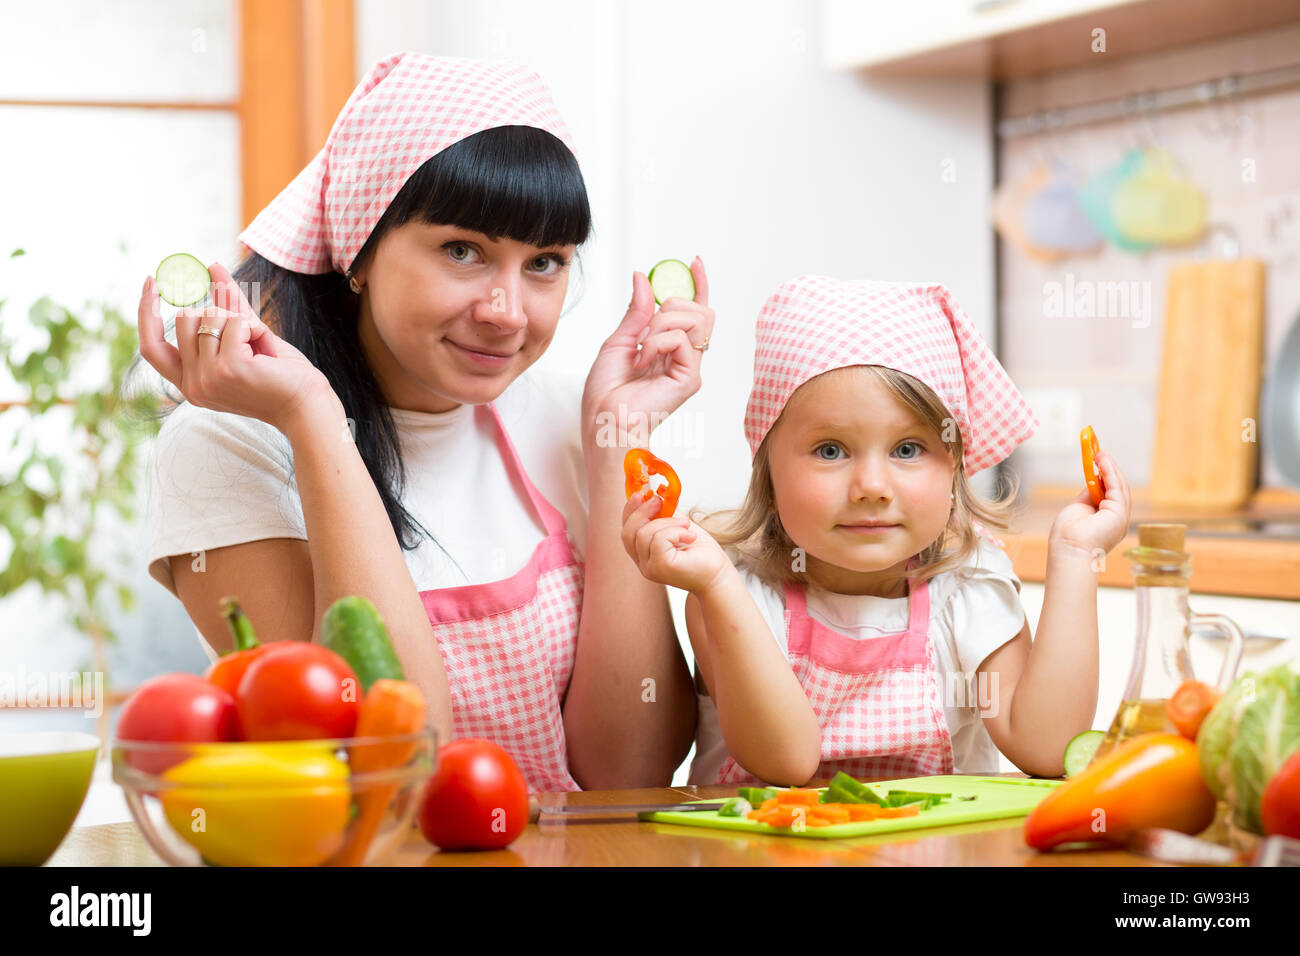 Woman and child little girl preparing vegetables in the kitchen Stock Photo